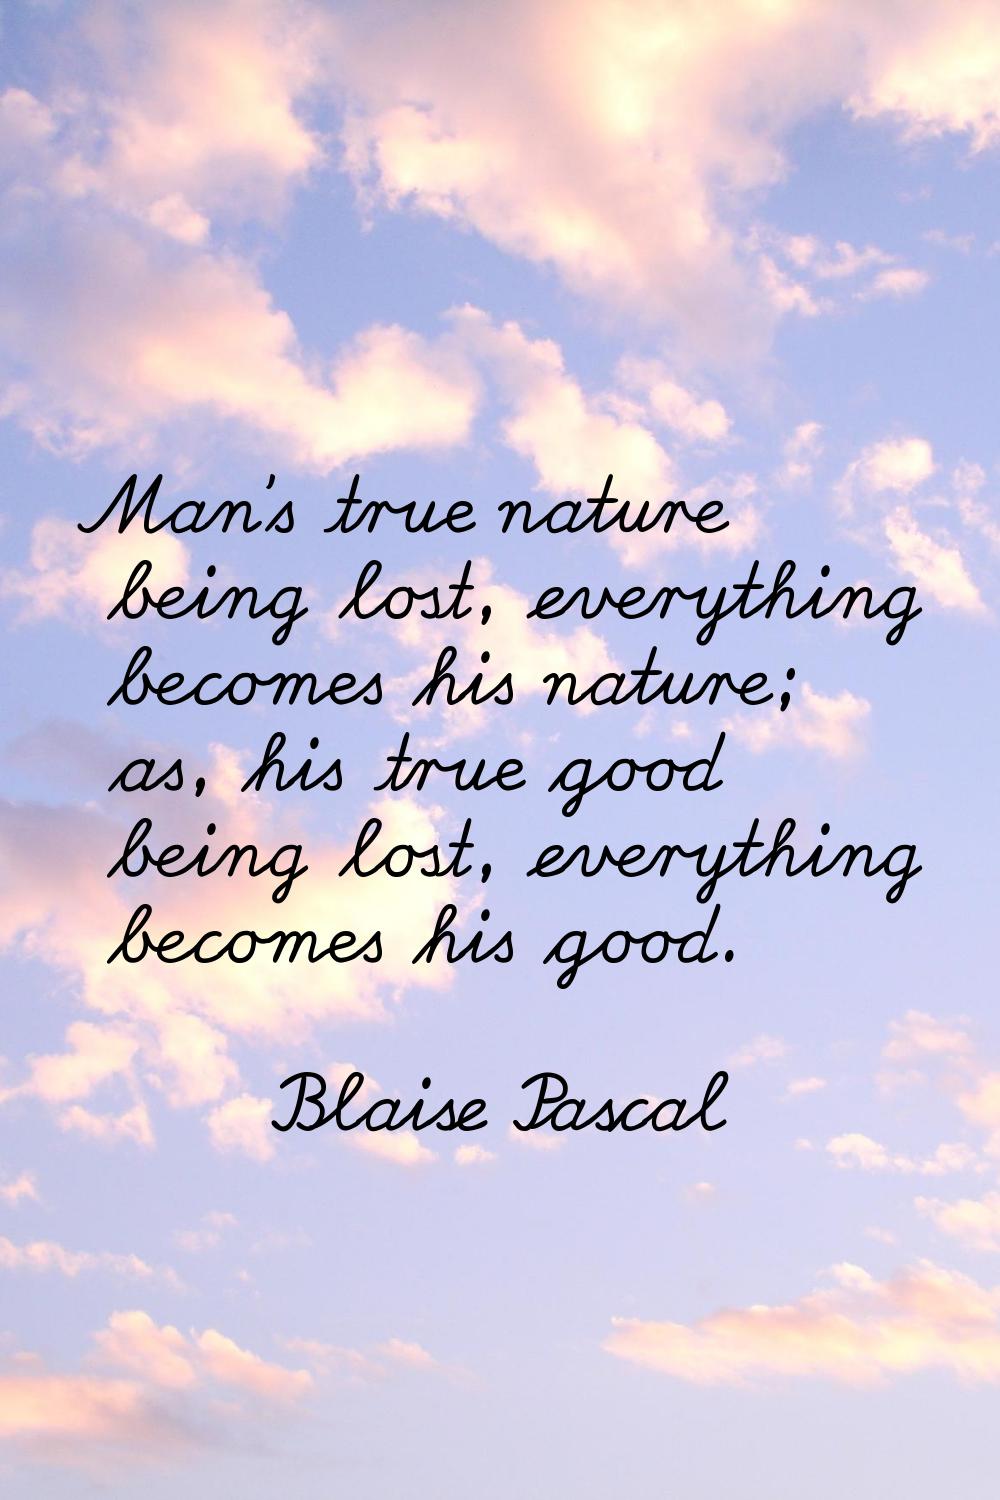 Man's true nature being lost, everything becomes his nature; as, his true good being lost, everythi